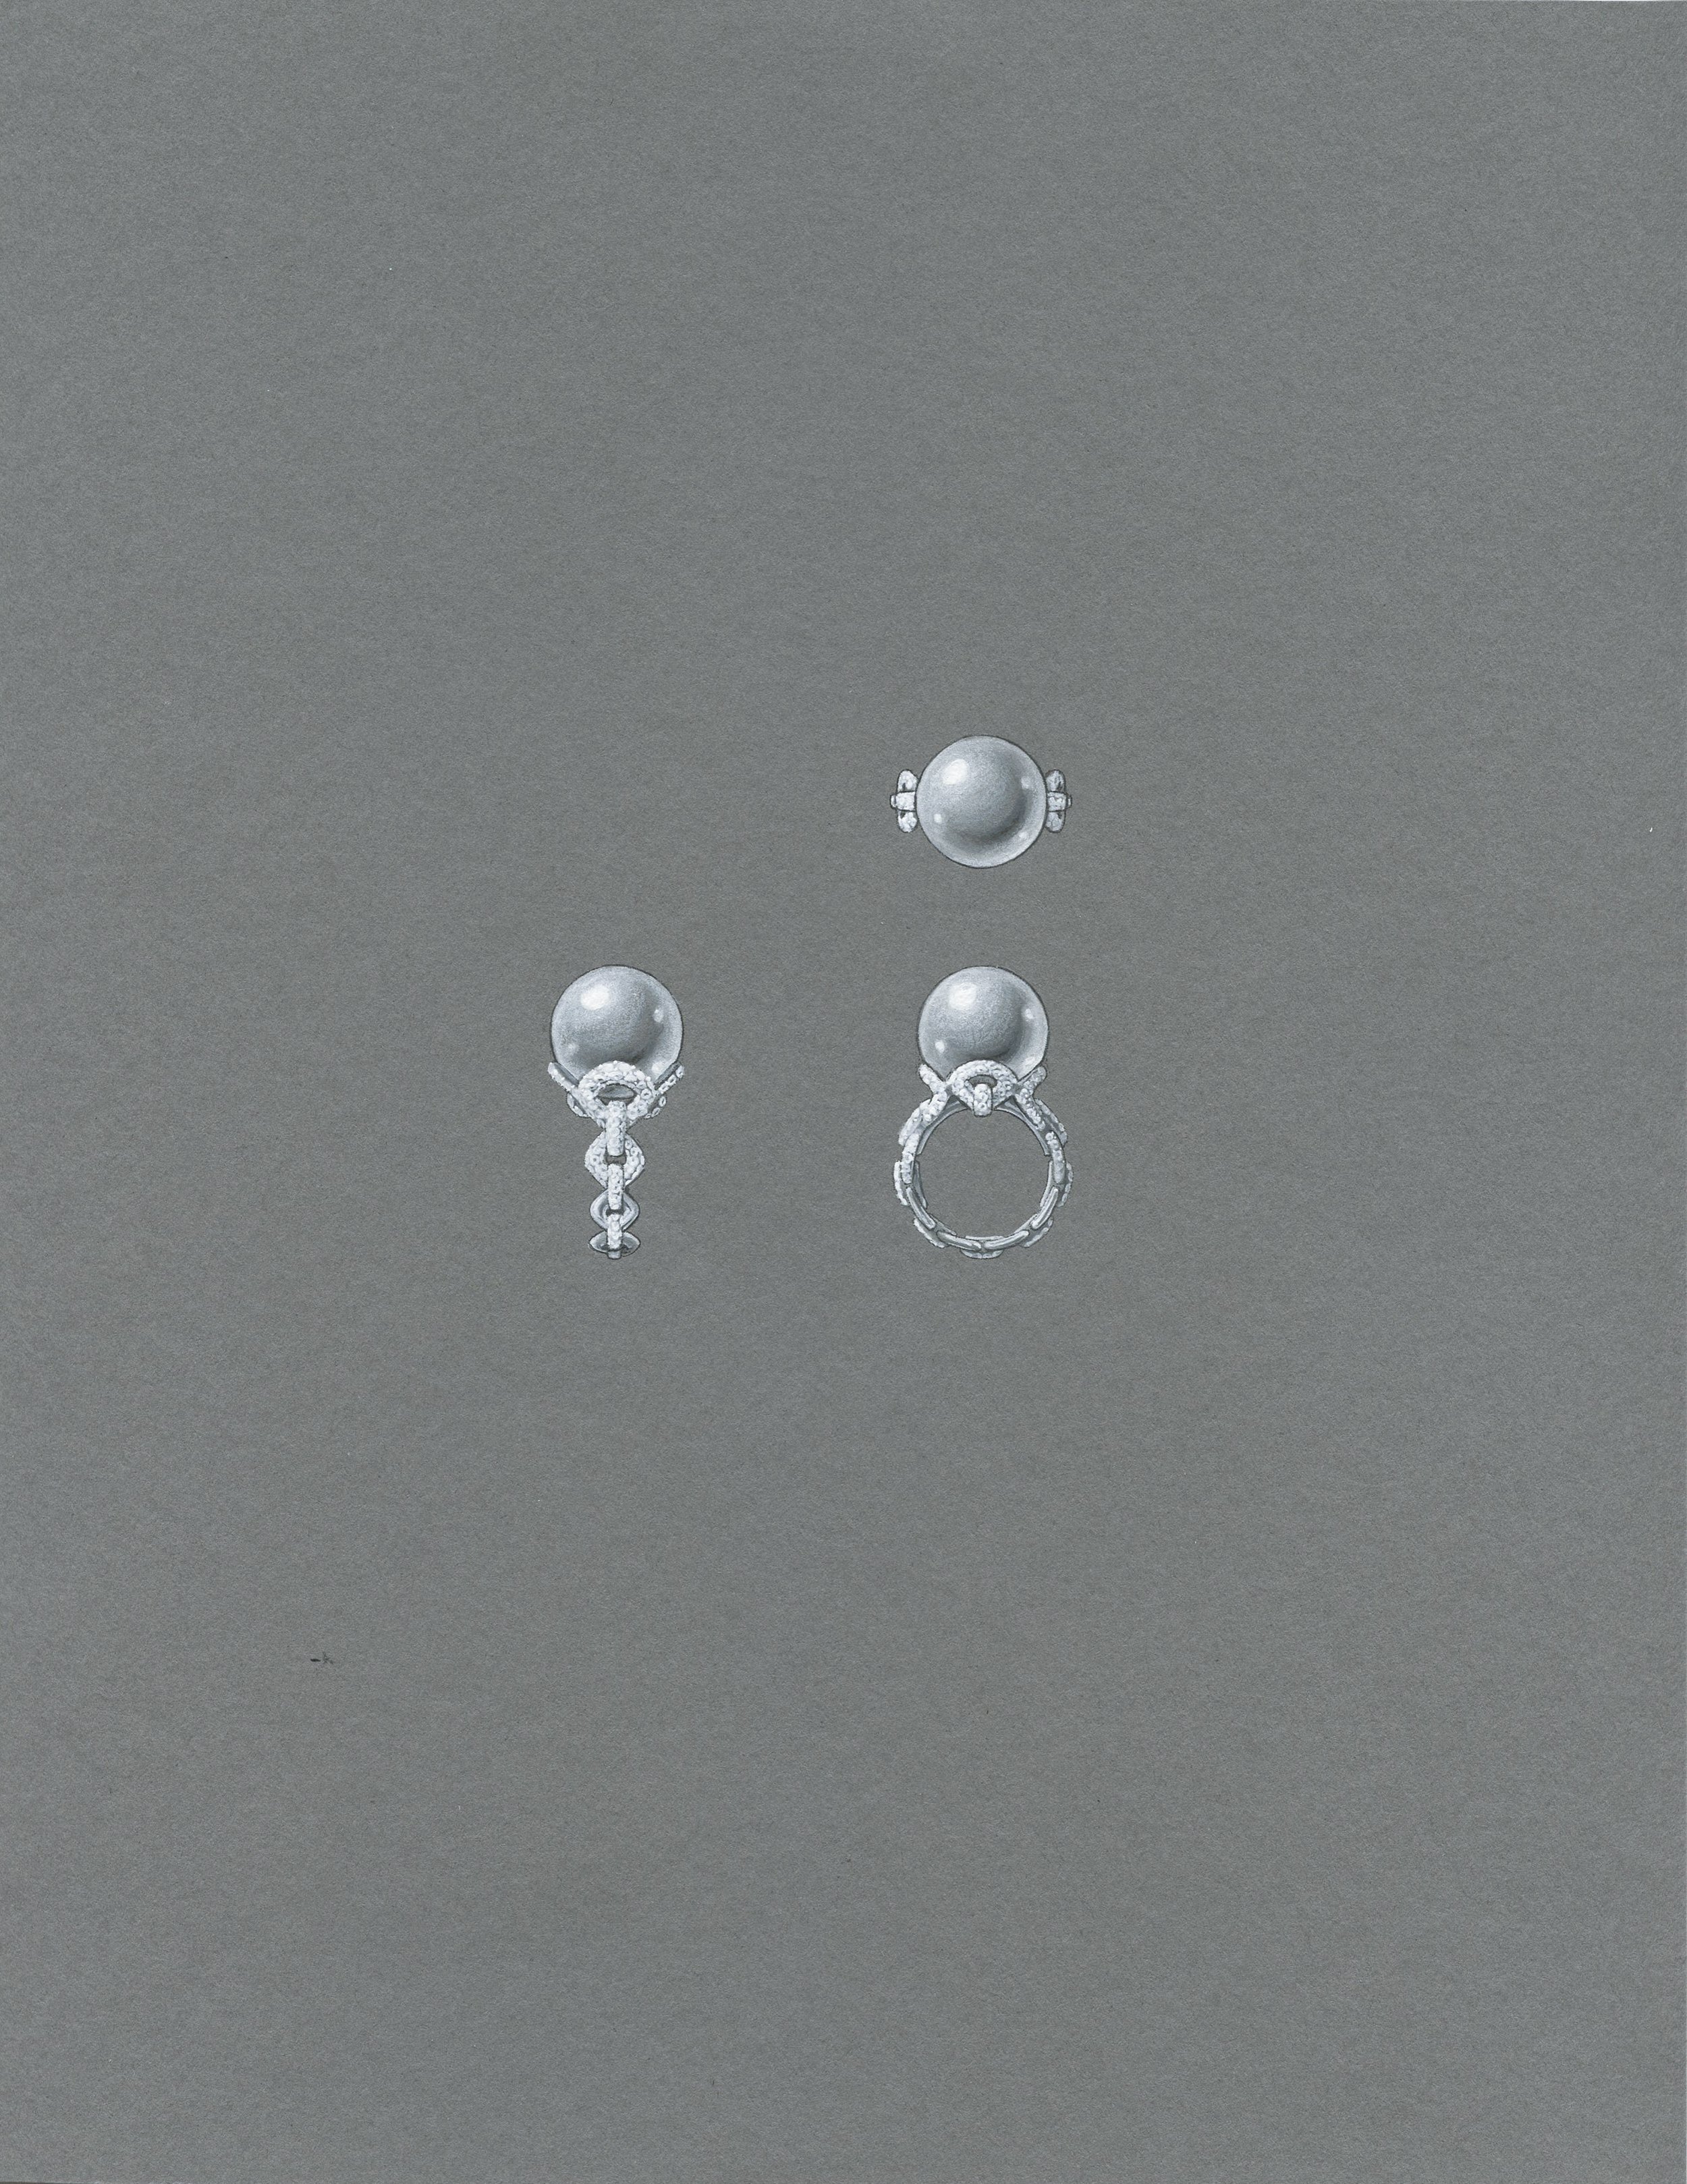  Gouache painting of a ring with a white South Sea pearl and white diamonds set into 18k white gold. 